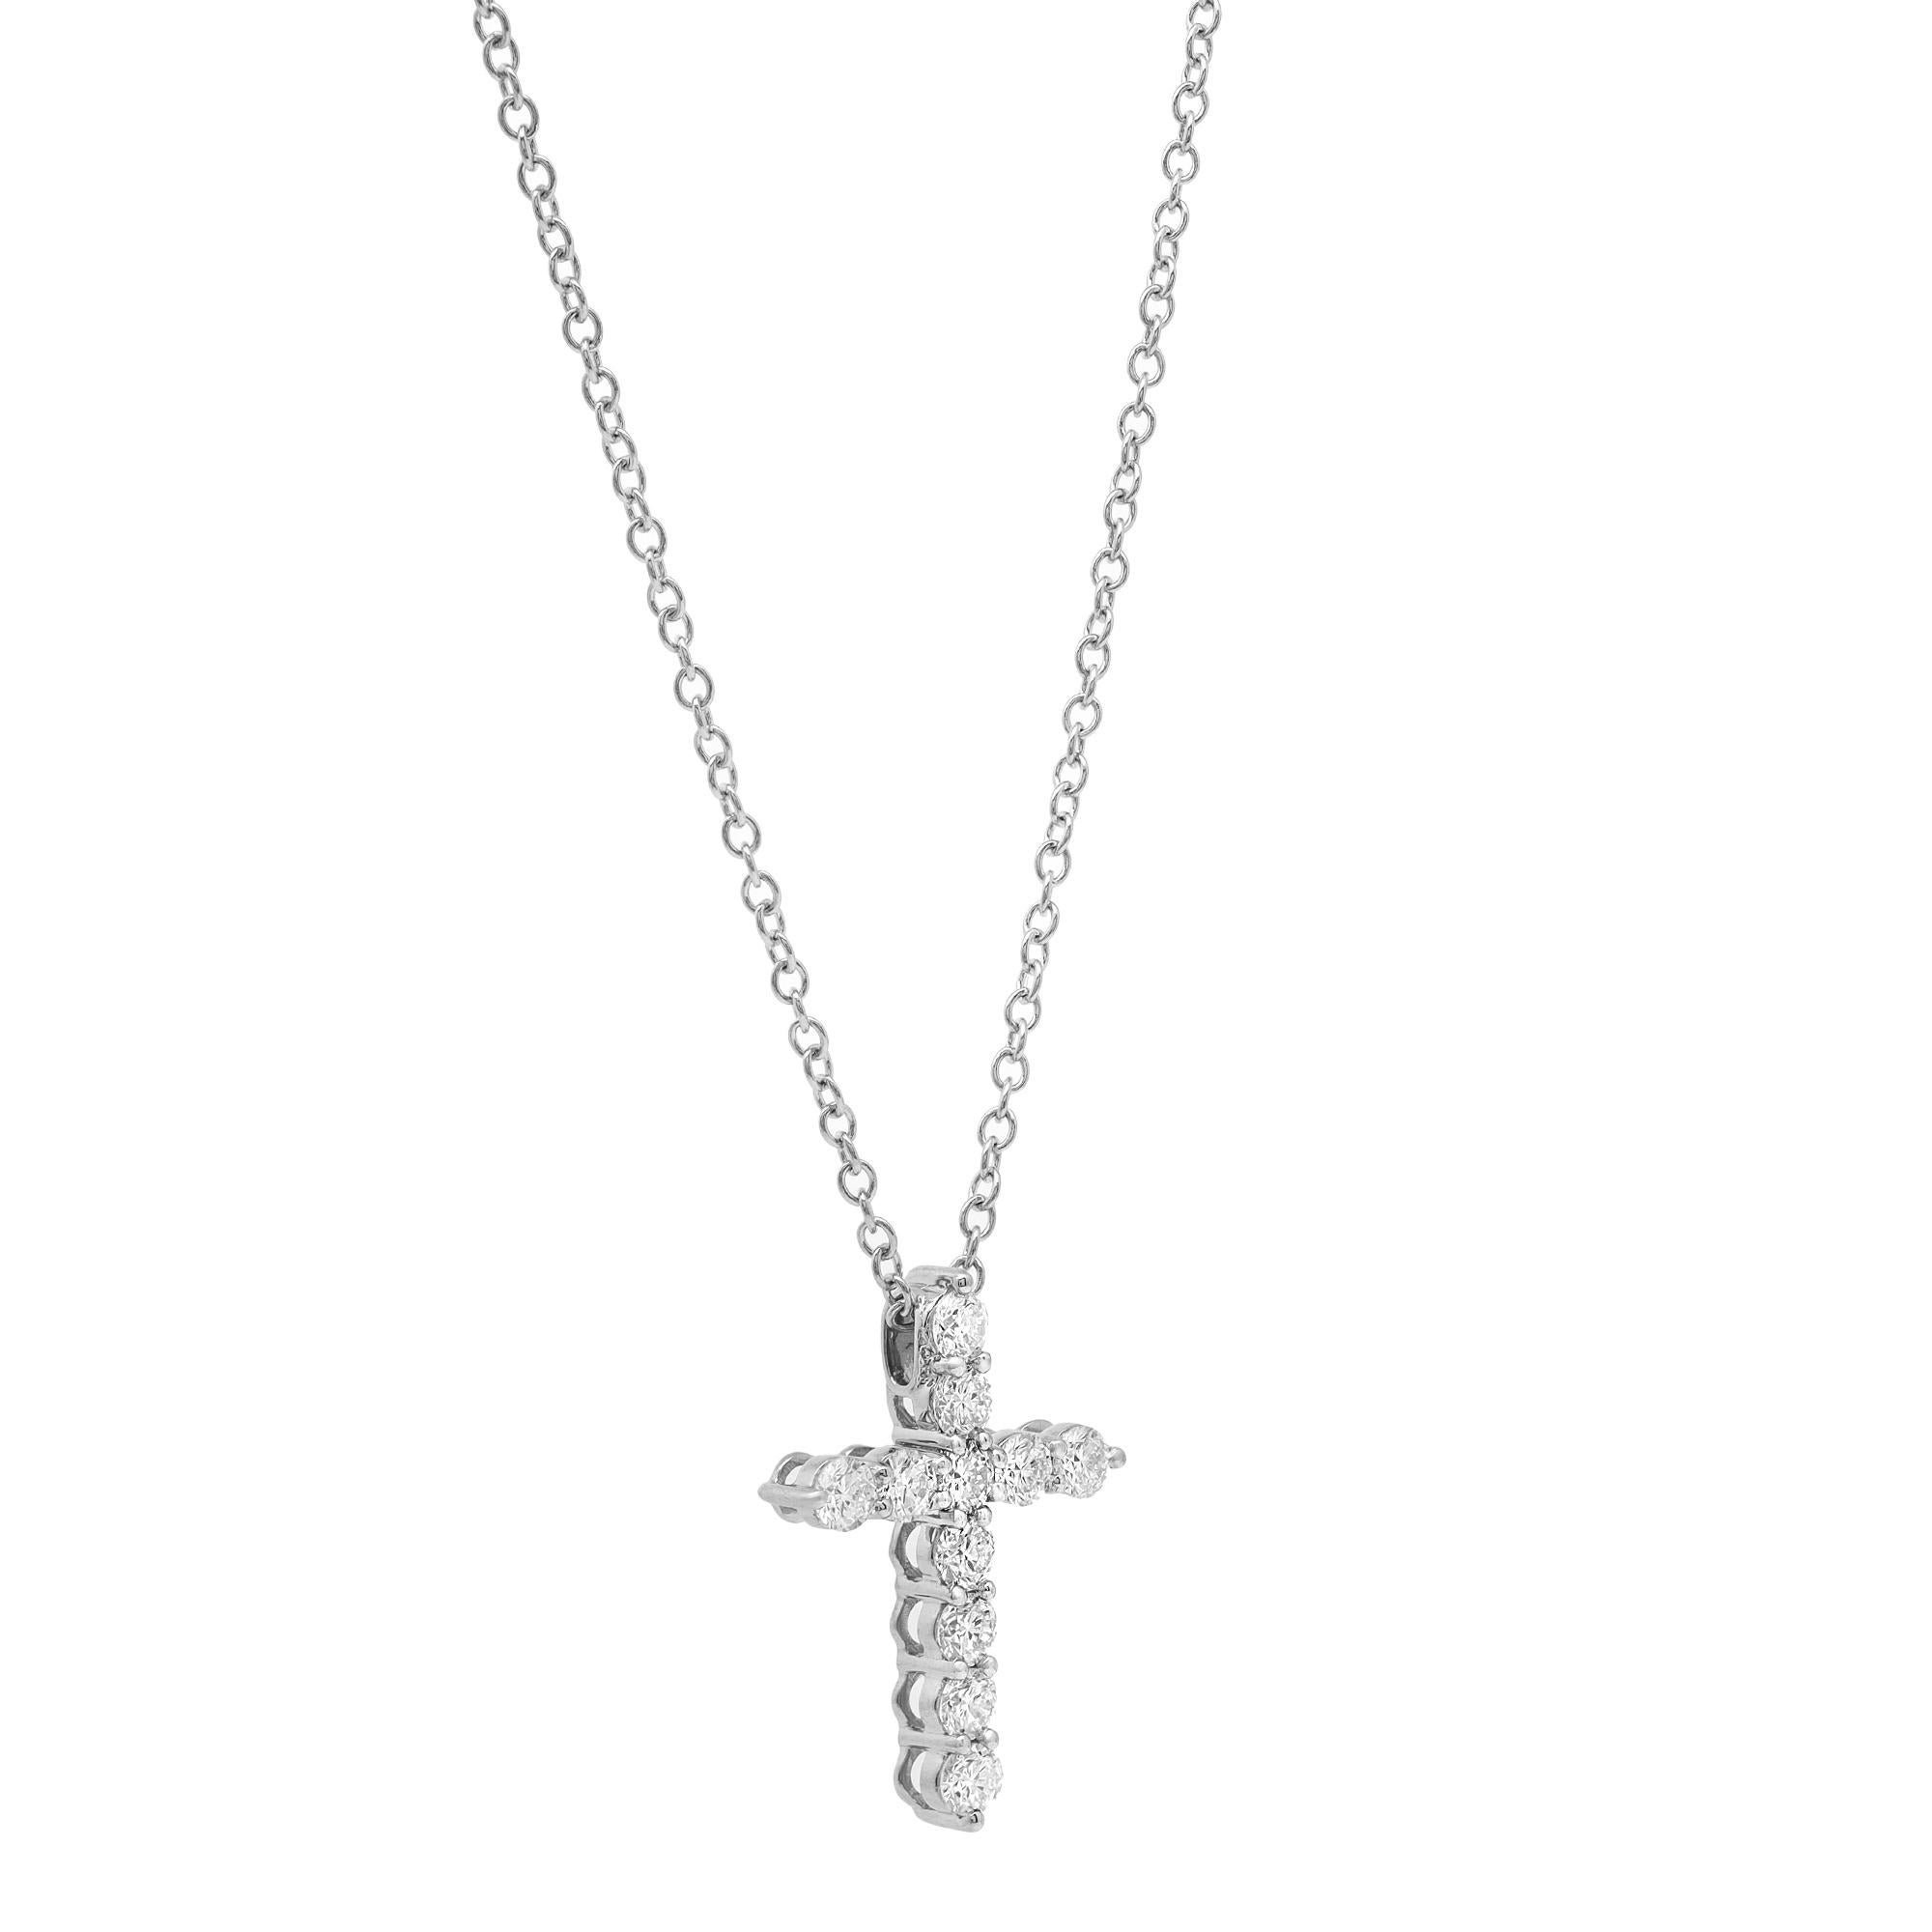 This gorgeous 18K white gold diamond cross pendant features 11 prong set round brilliant cut sparkling diamonds weighing approximately 1.01 carats in total. Diamond quality: G-H color and VS-SI clarity. Pendant size: 21.9mm x 16.2mm. Chain length: